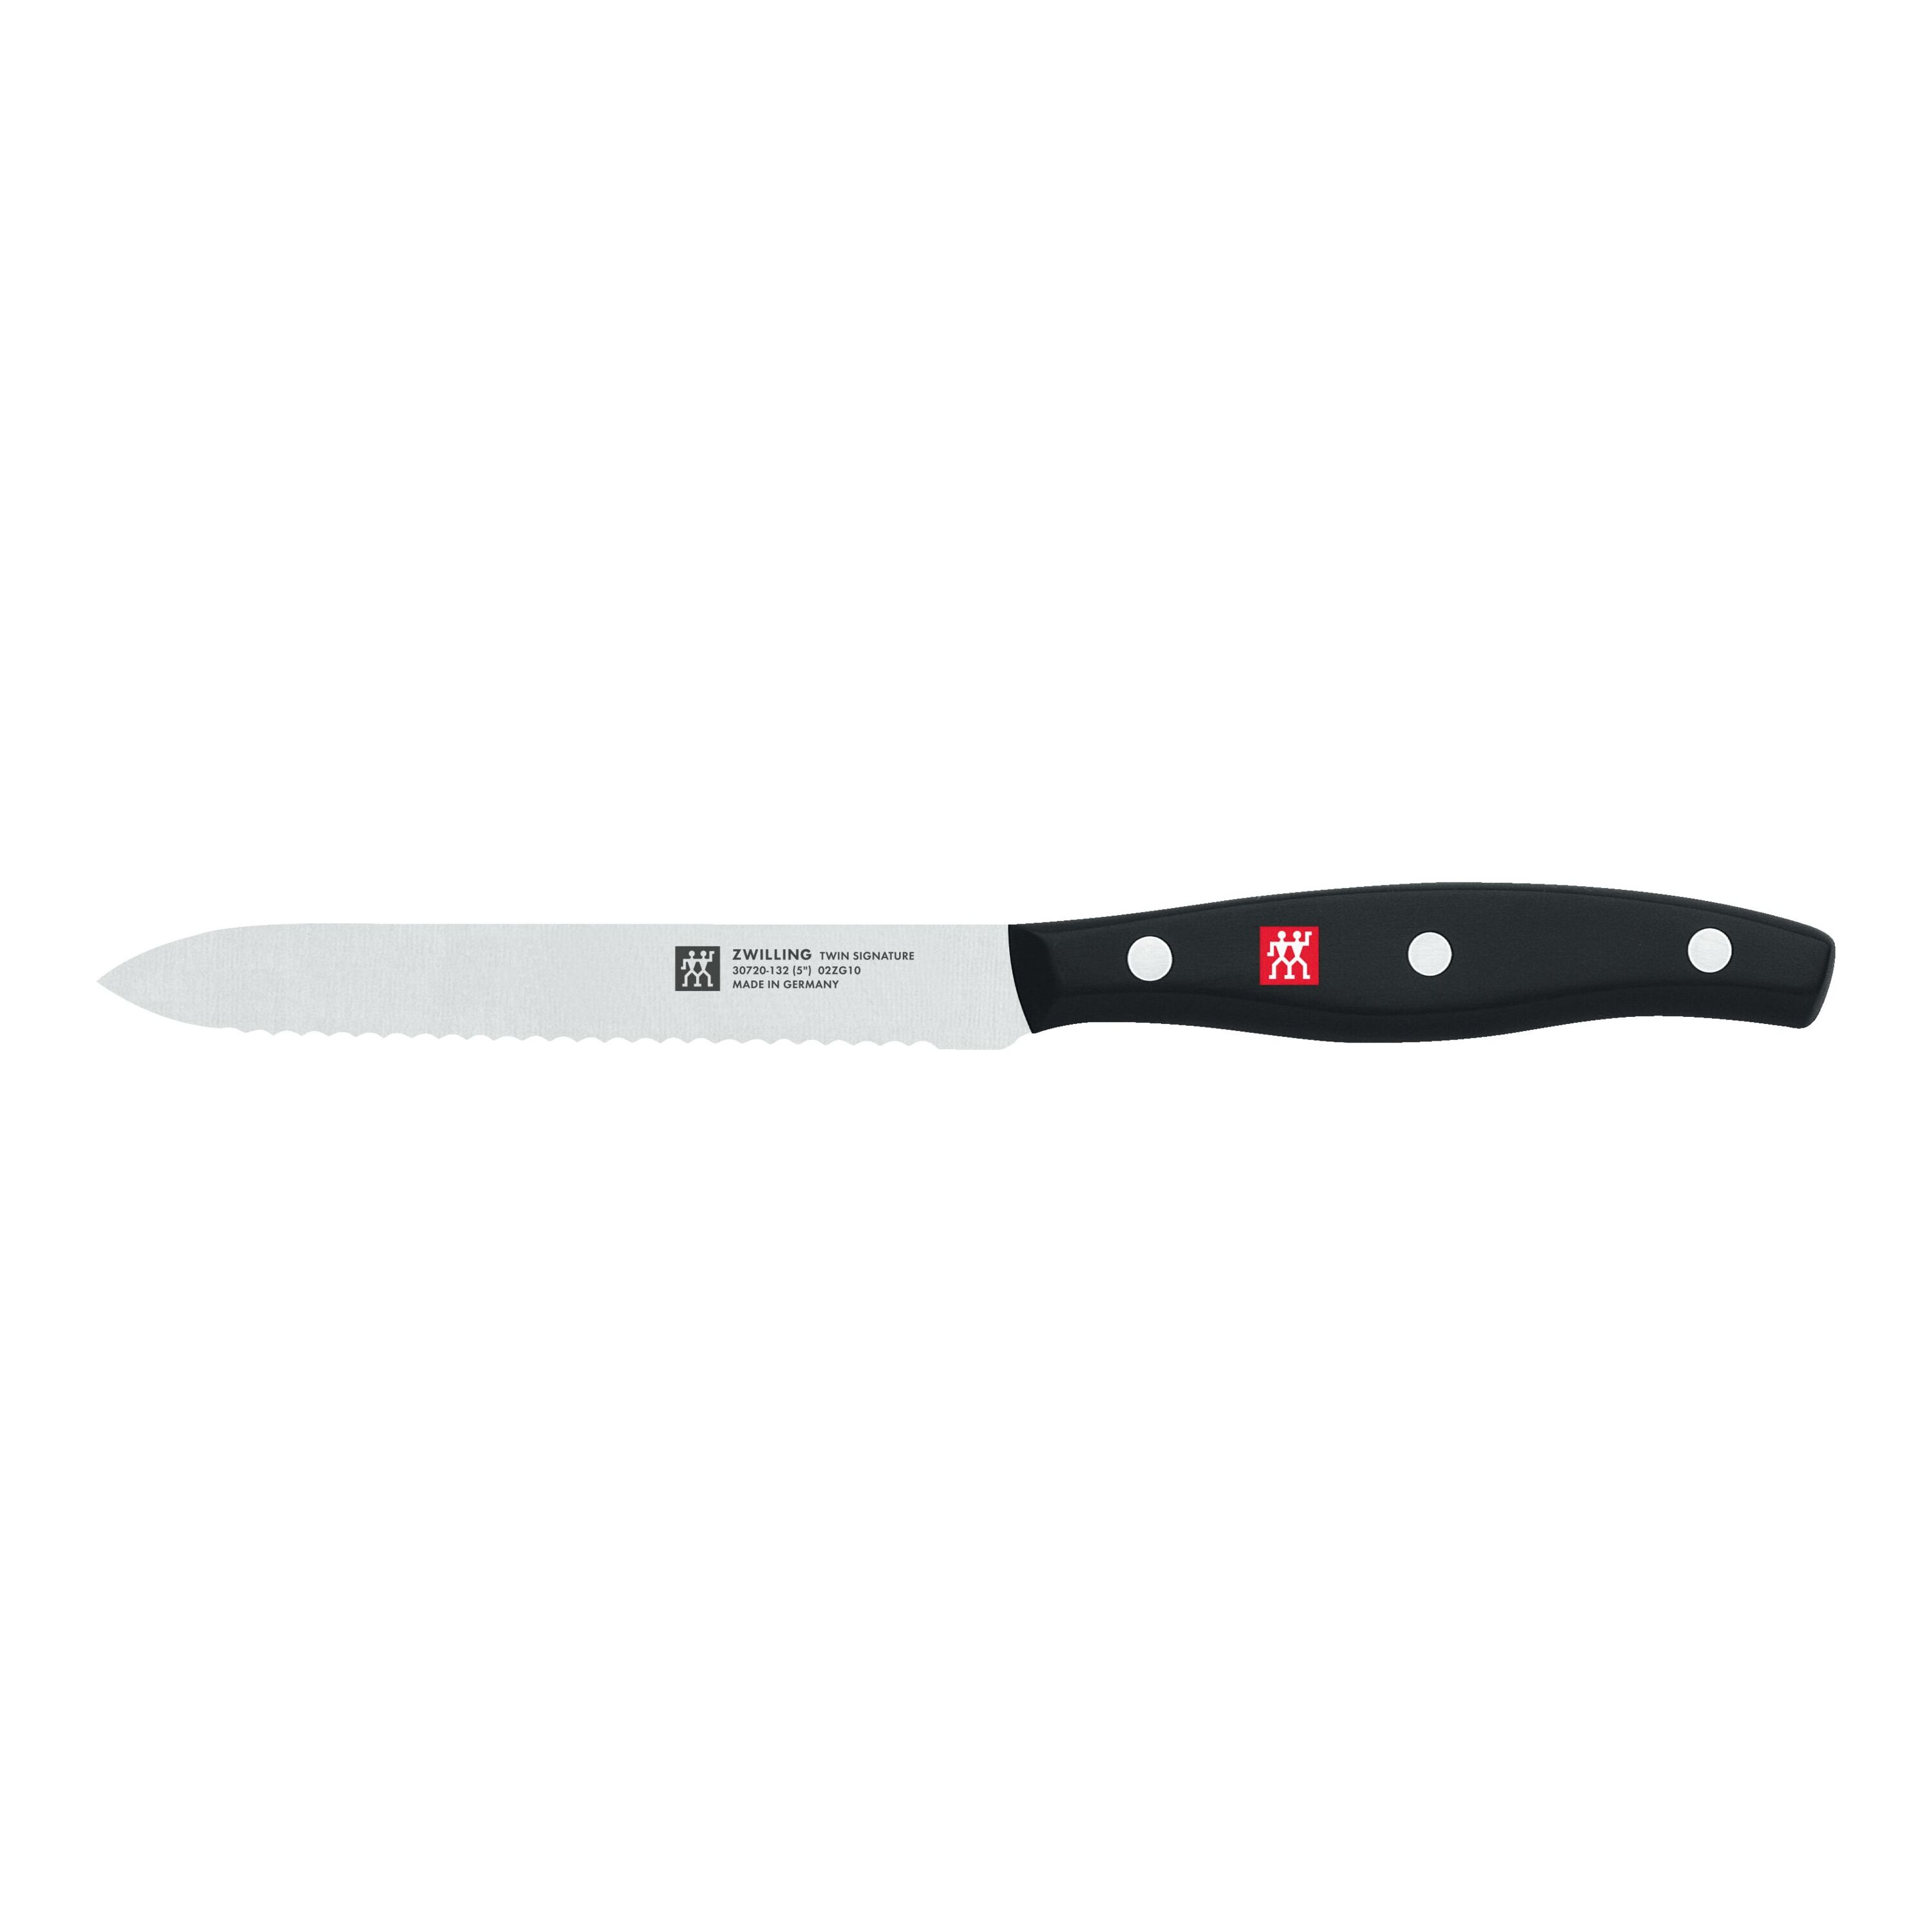 Signature 5-inch Utility Knife – Aikido Steel